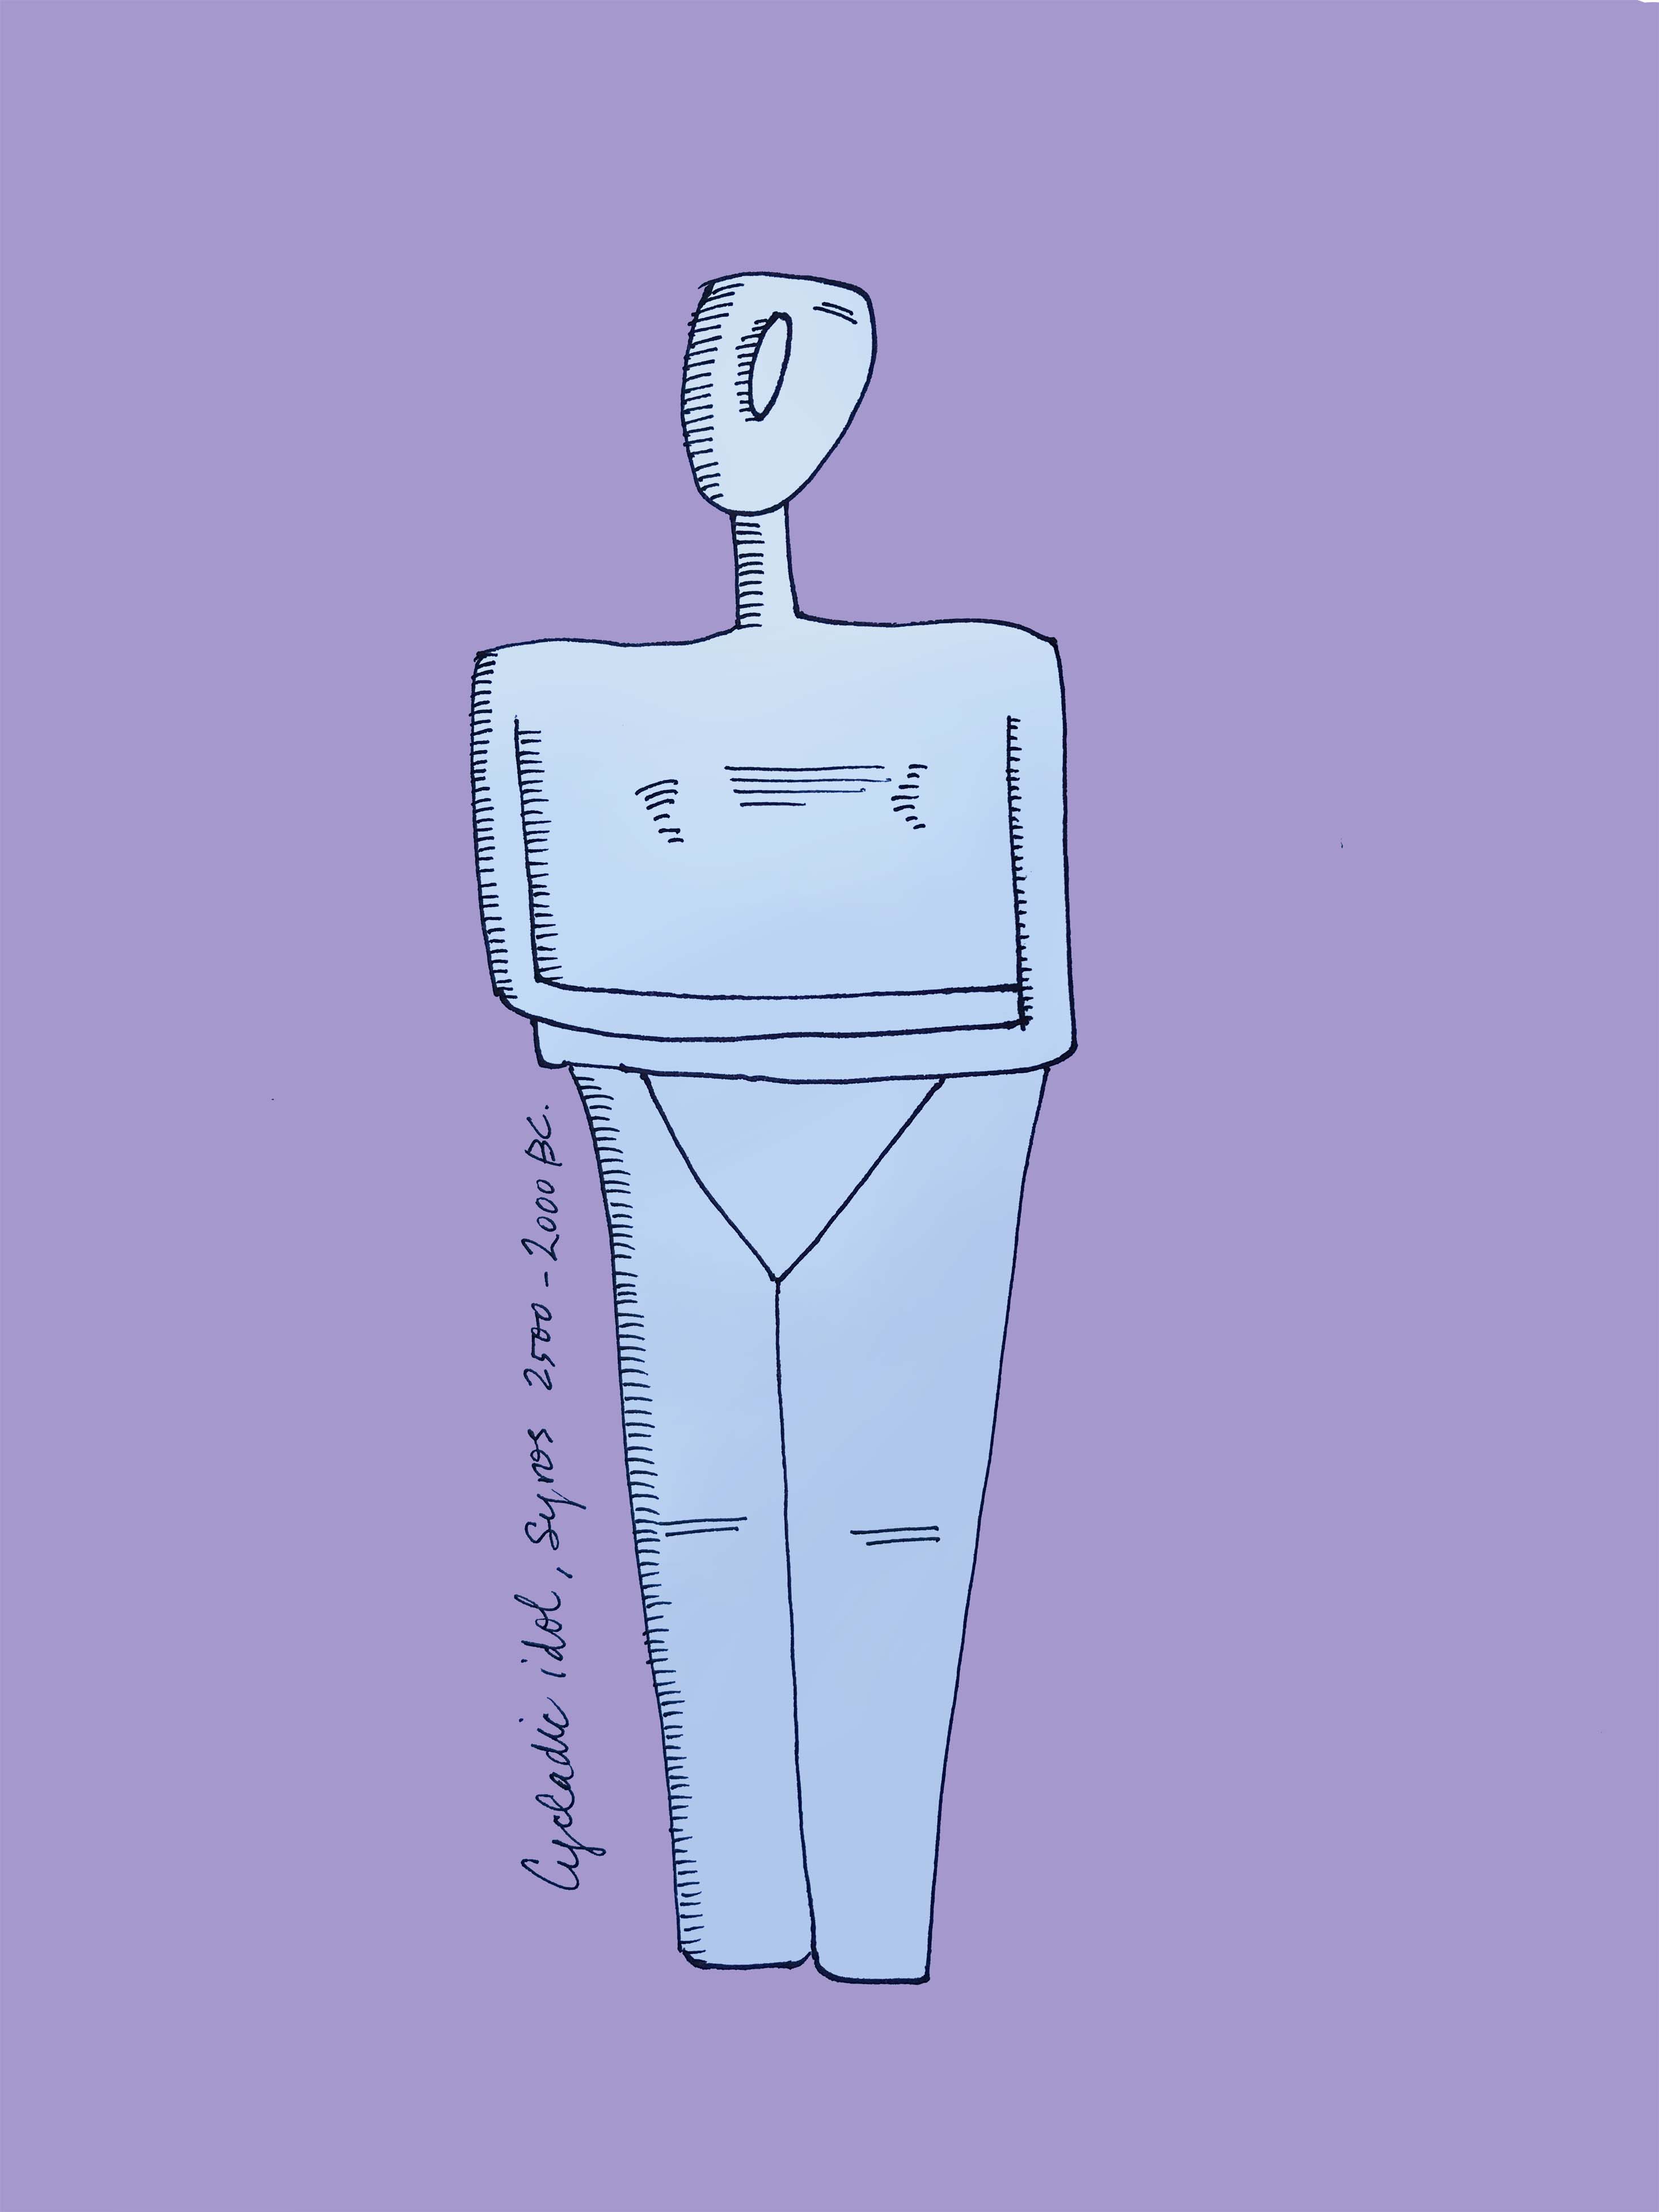 art every day number 268 / illustration / cycladic idol